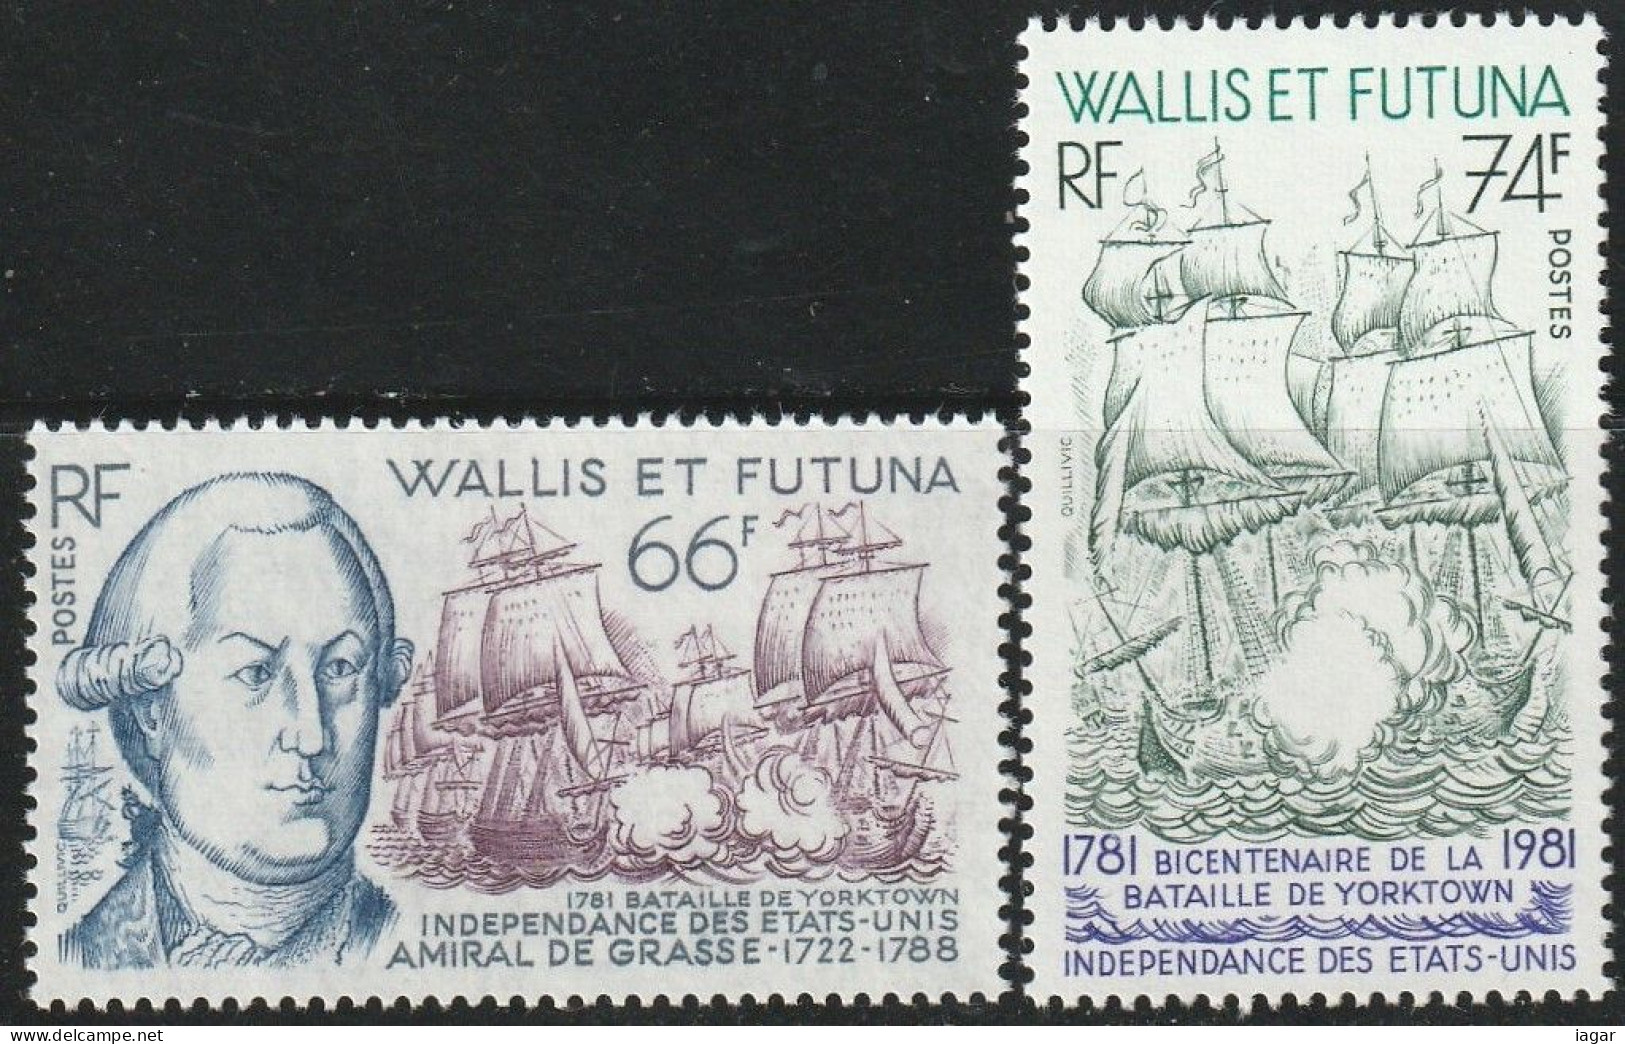 THEMATIC HISTORY:  INDEPENDENCE OF THE UNITED STATES, BATTLE OF YORKTOWN. ASPECTS OF NAVAL BATTLE  -  WALLIS AND FUTUNA - Us Independence